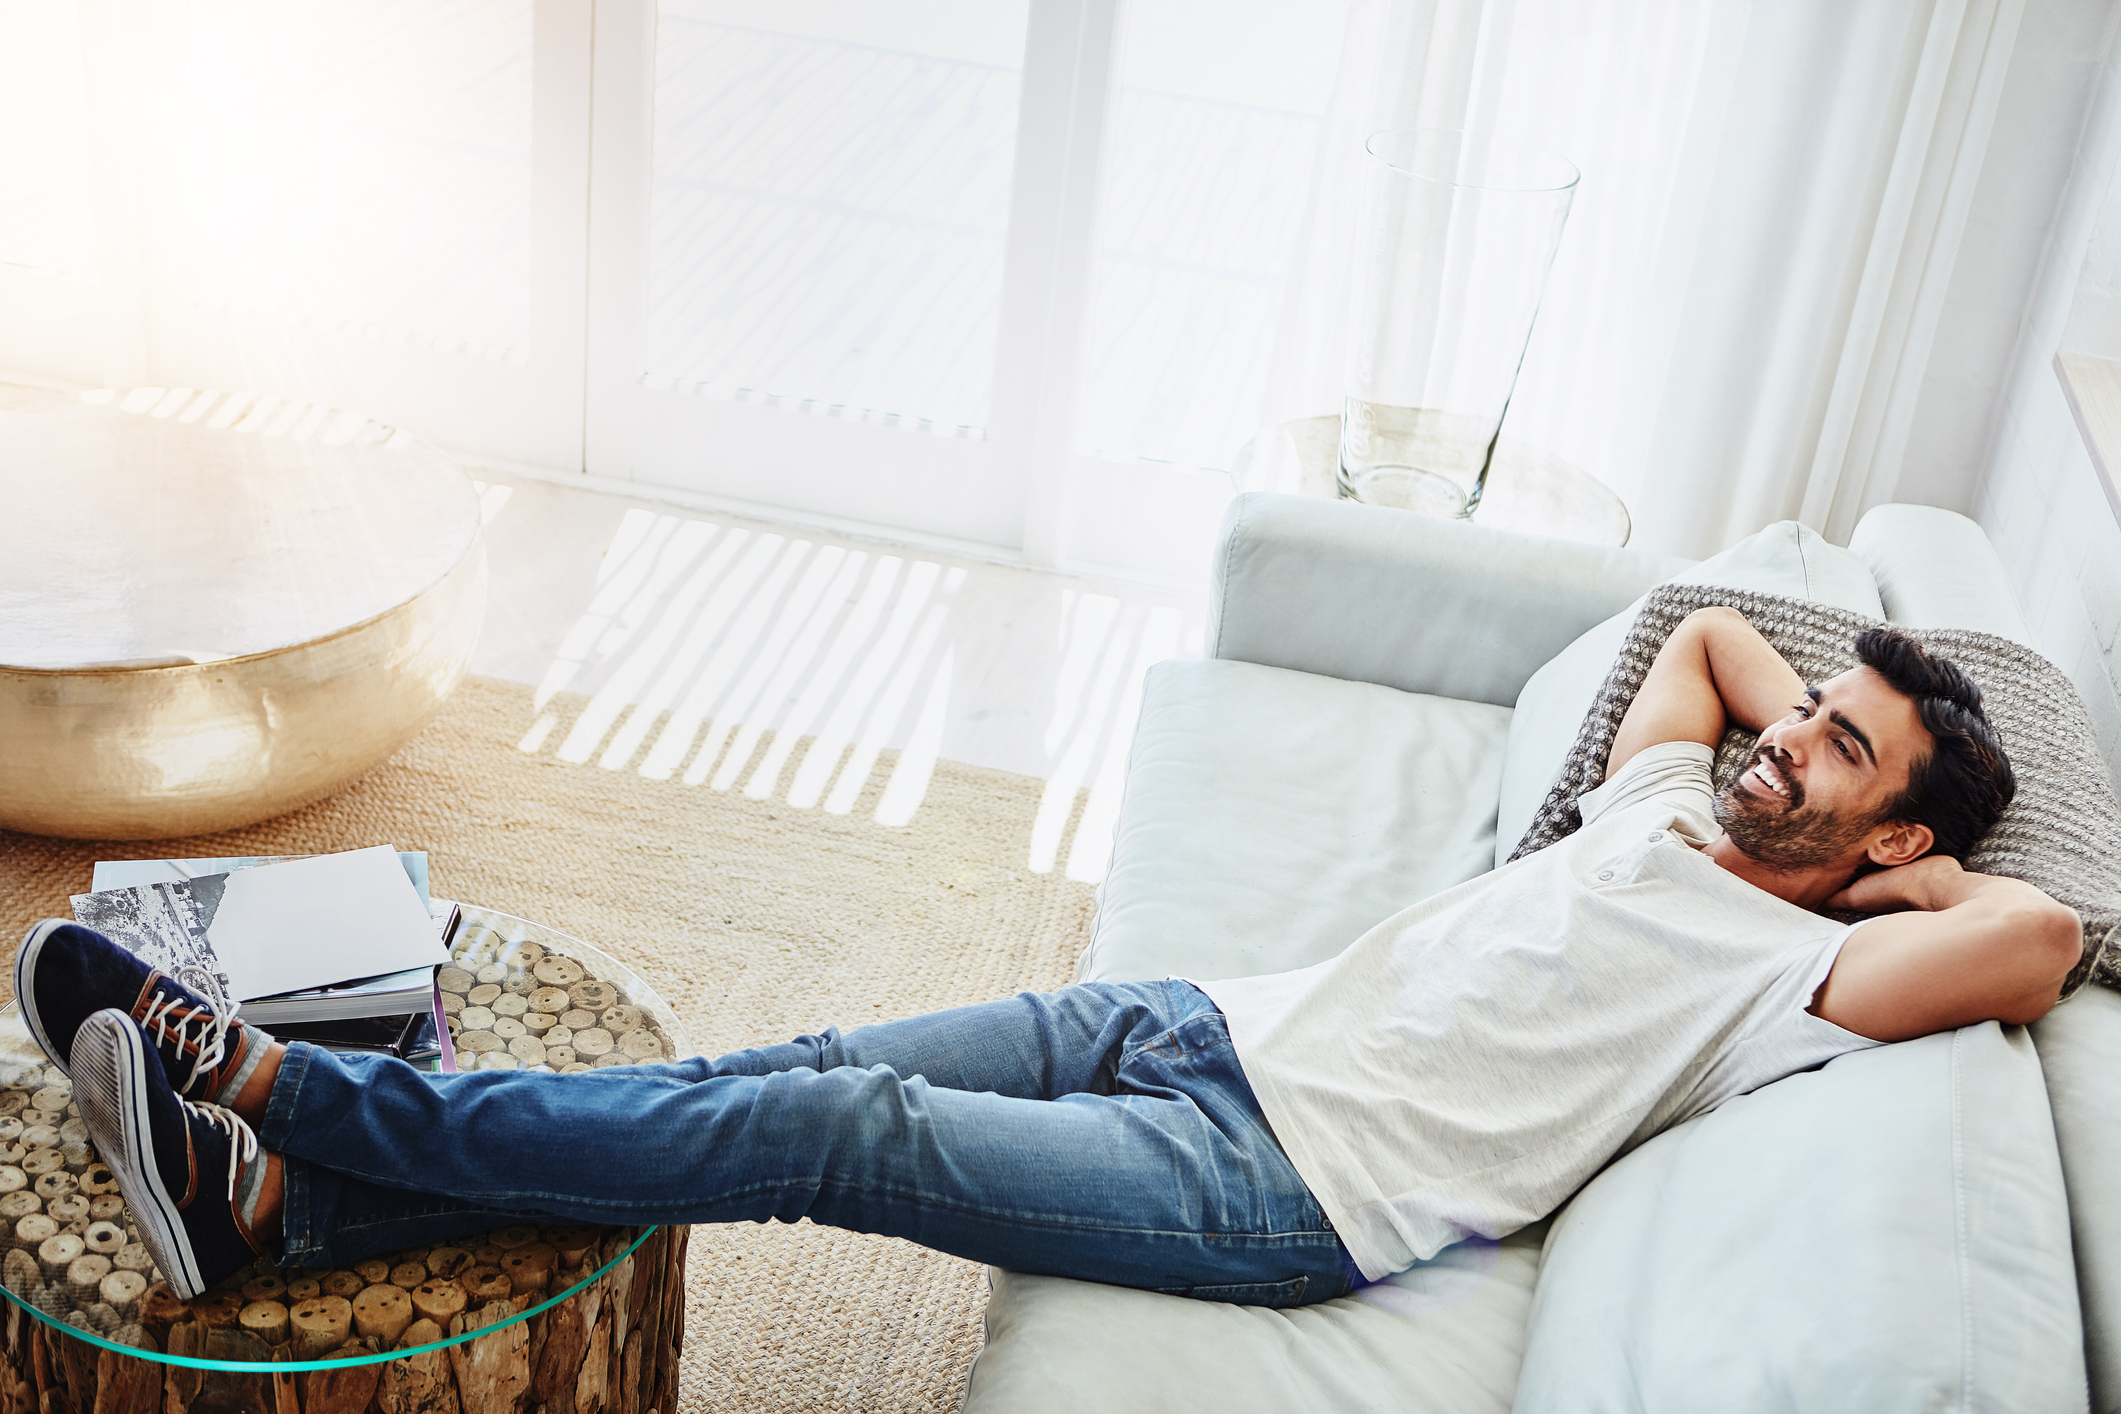 It’s Time to Rest: 5 Types of Rest to Add Into Your Routine